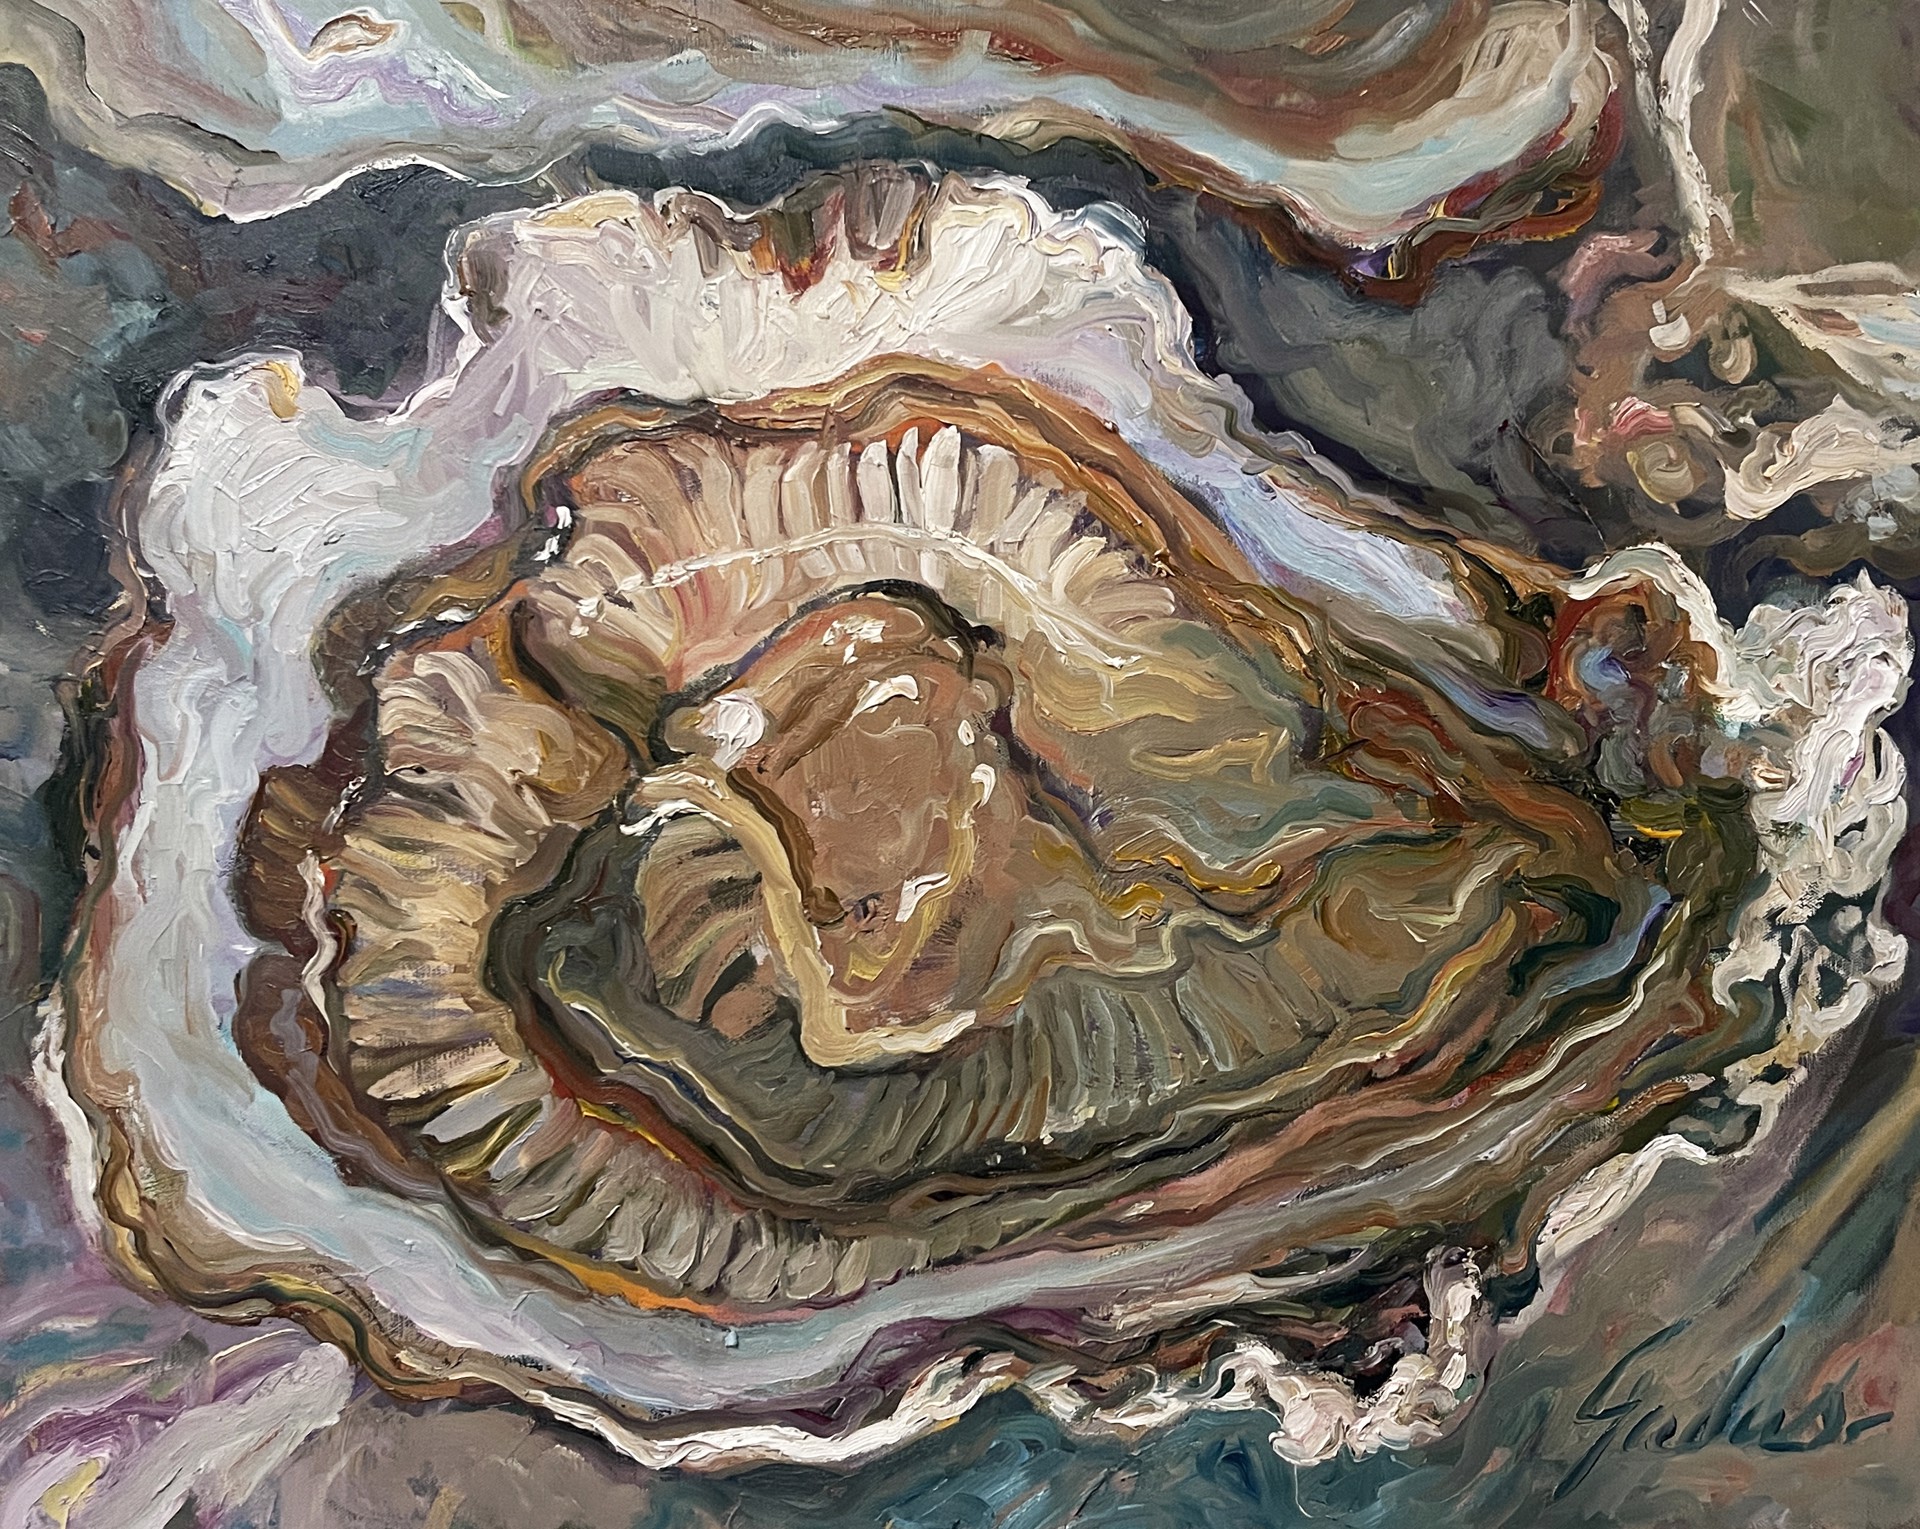 Oyster Study2 by Carrie Jadus